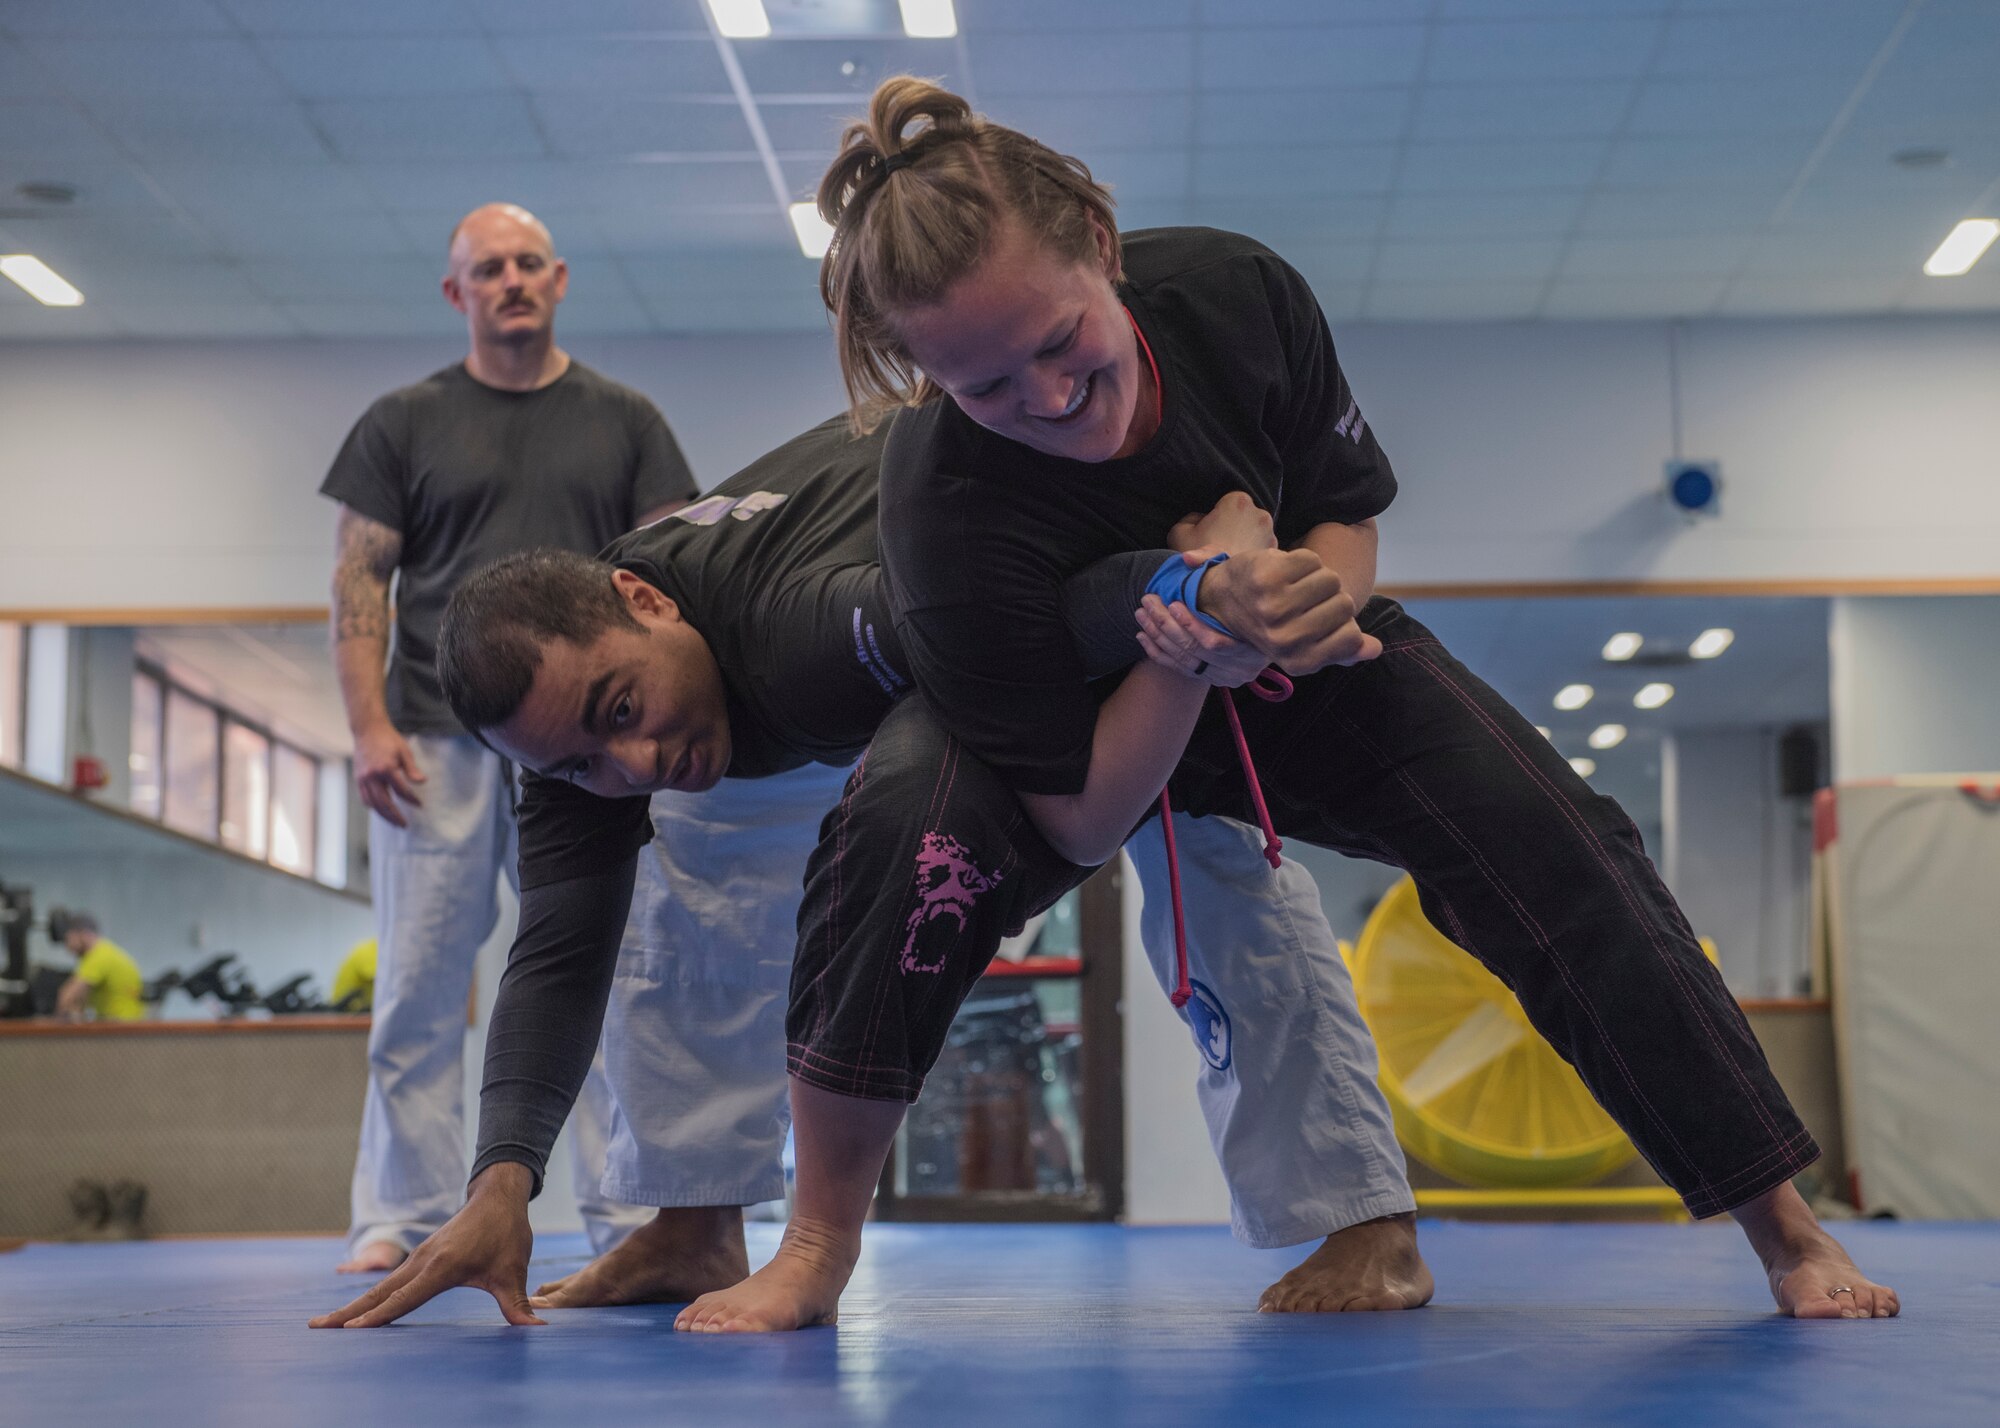 Maj. Lydia Rodriguez, 39th Medical Operations Squadron Medical Services Flight commander, demonstrates a hold on Tech. Sgt. James Baldwin, 39th Security Forces Squadron NCO in-charge of standardization and evaluations, during a self-defense class March 19, 2019, at Incirlik Air Base, Turkey.